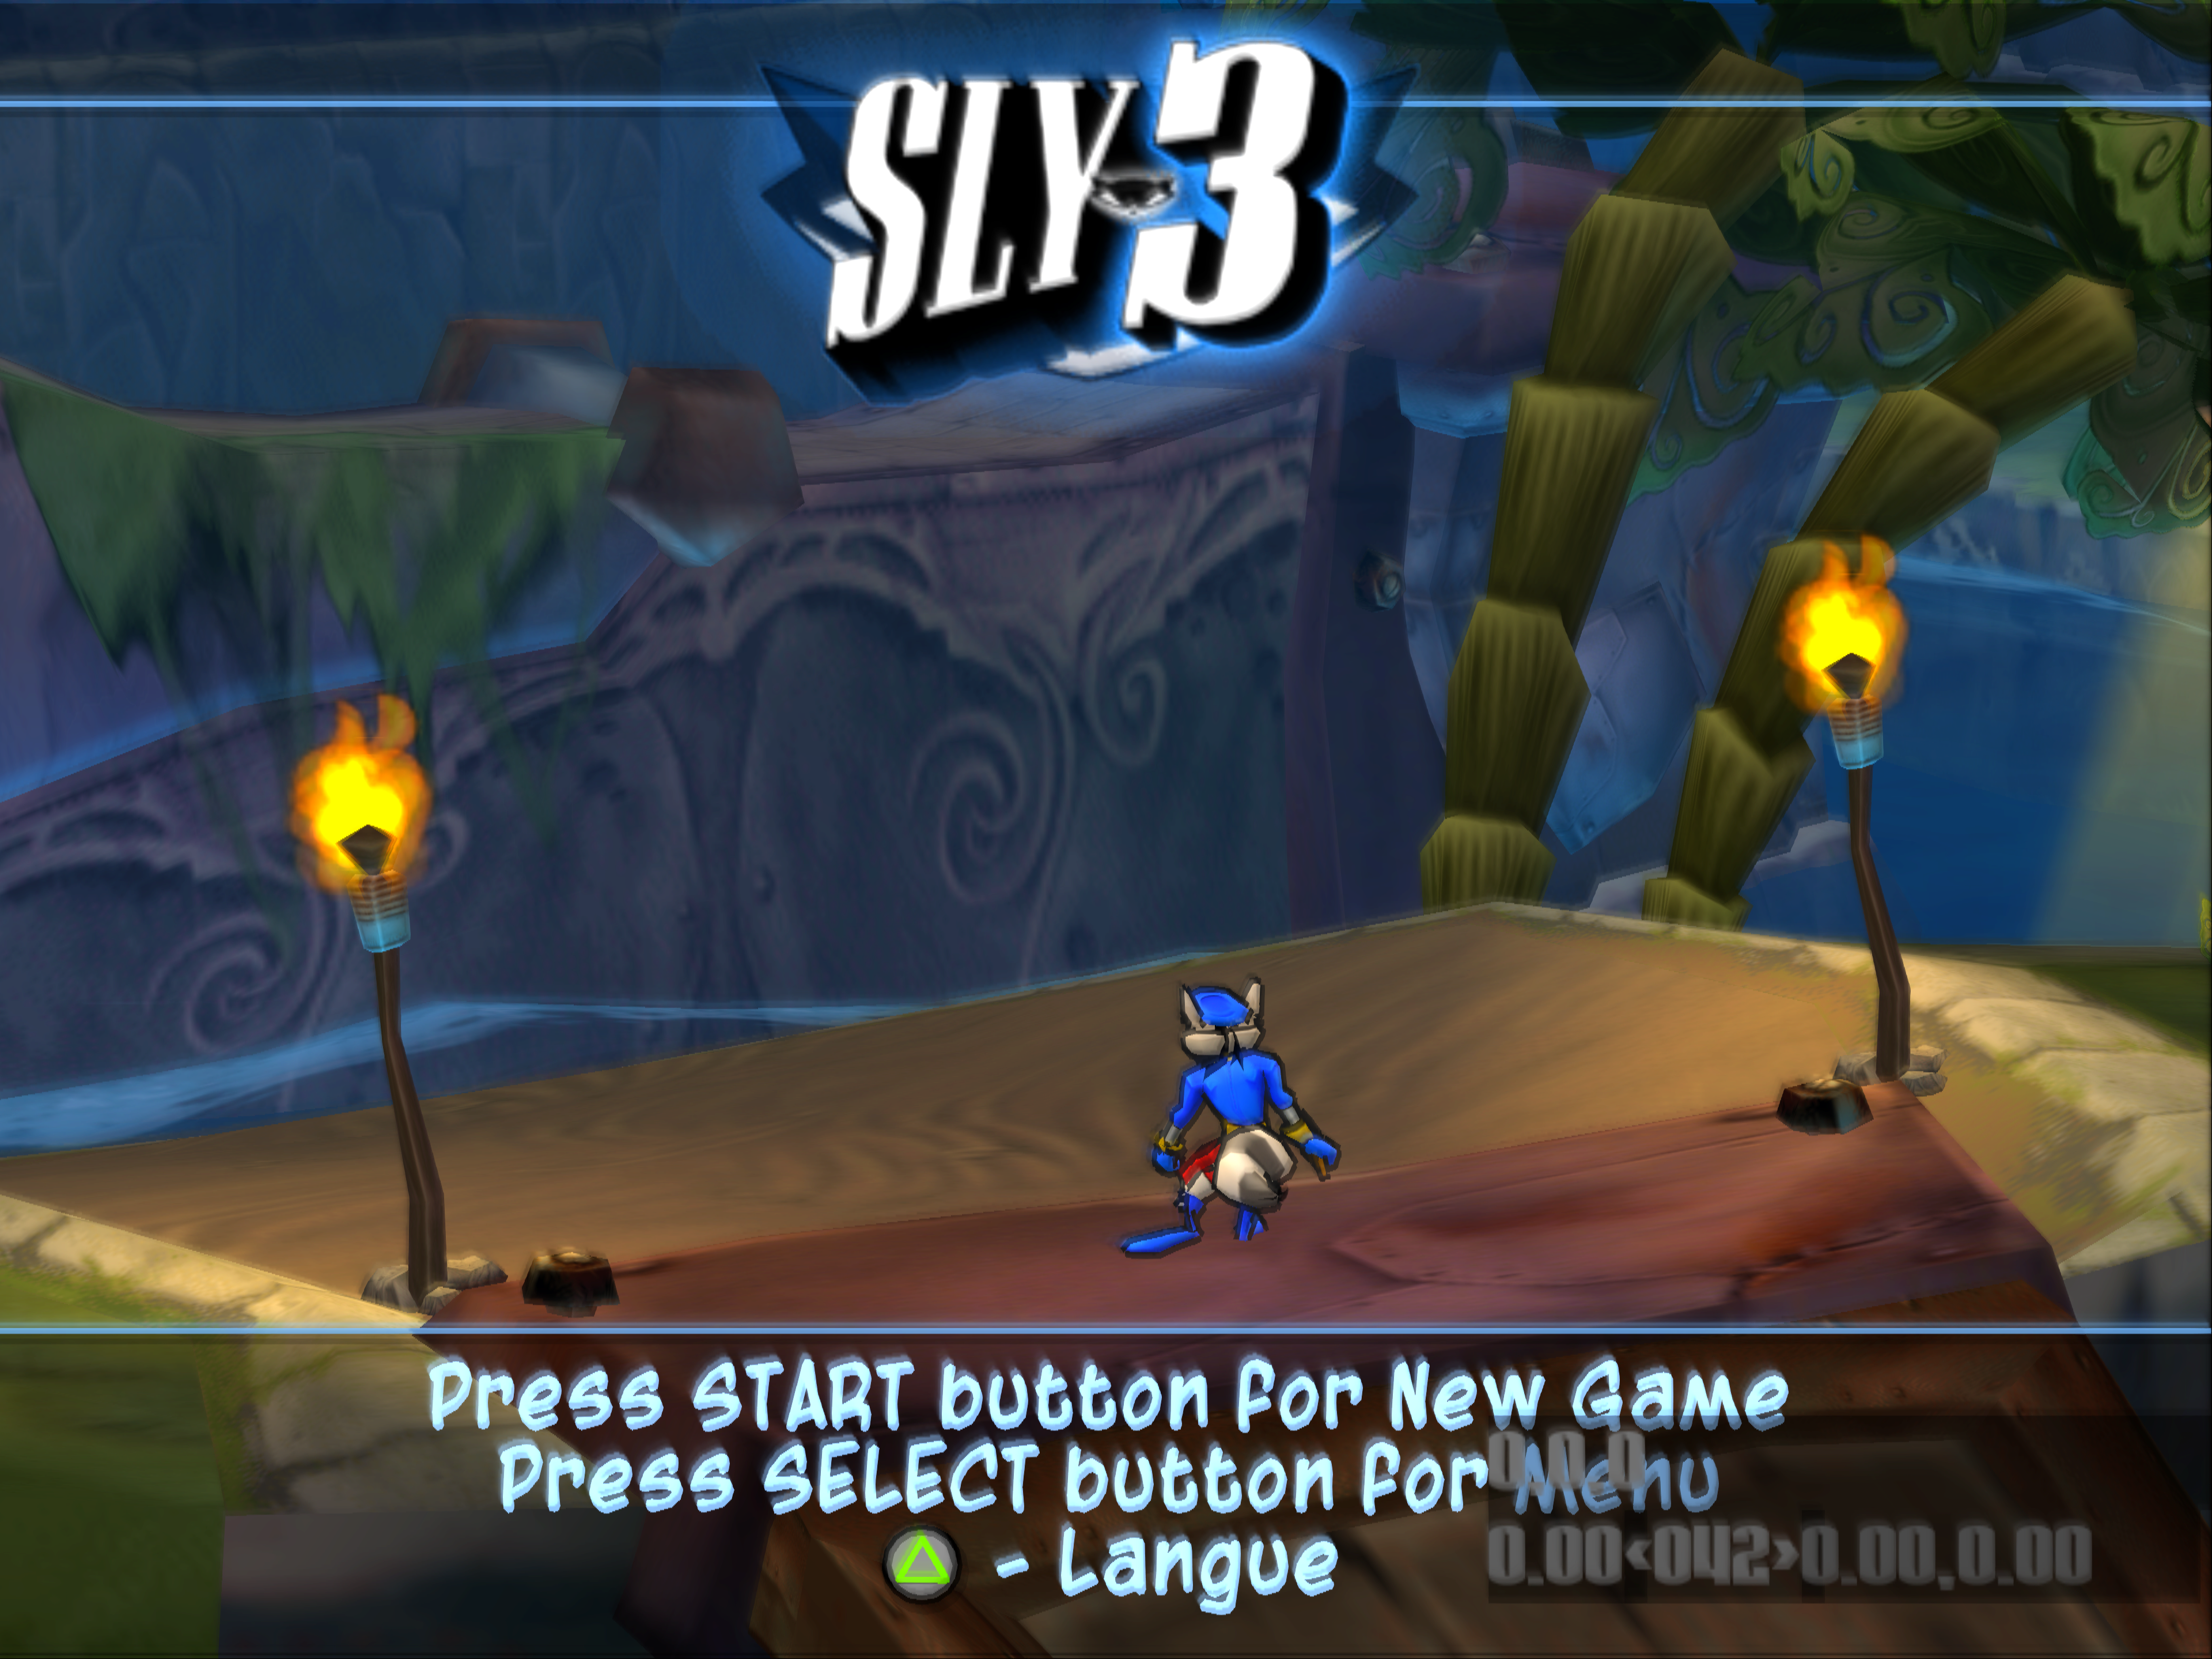  Sly 3 Honor Among Thieves - PlayStation 2 : Unknown: Video Games